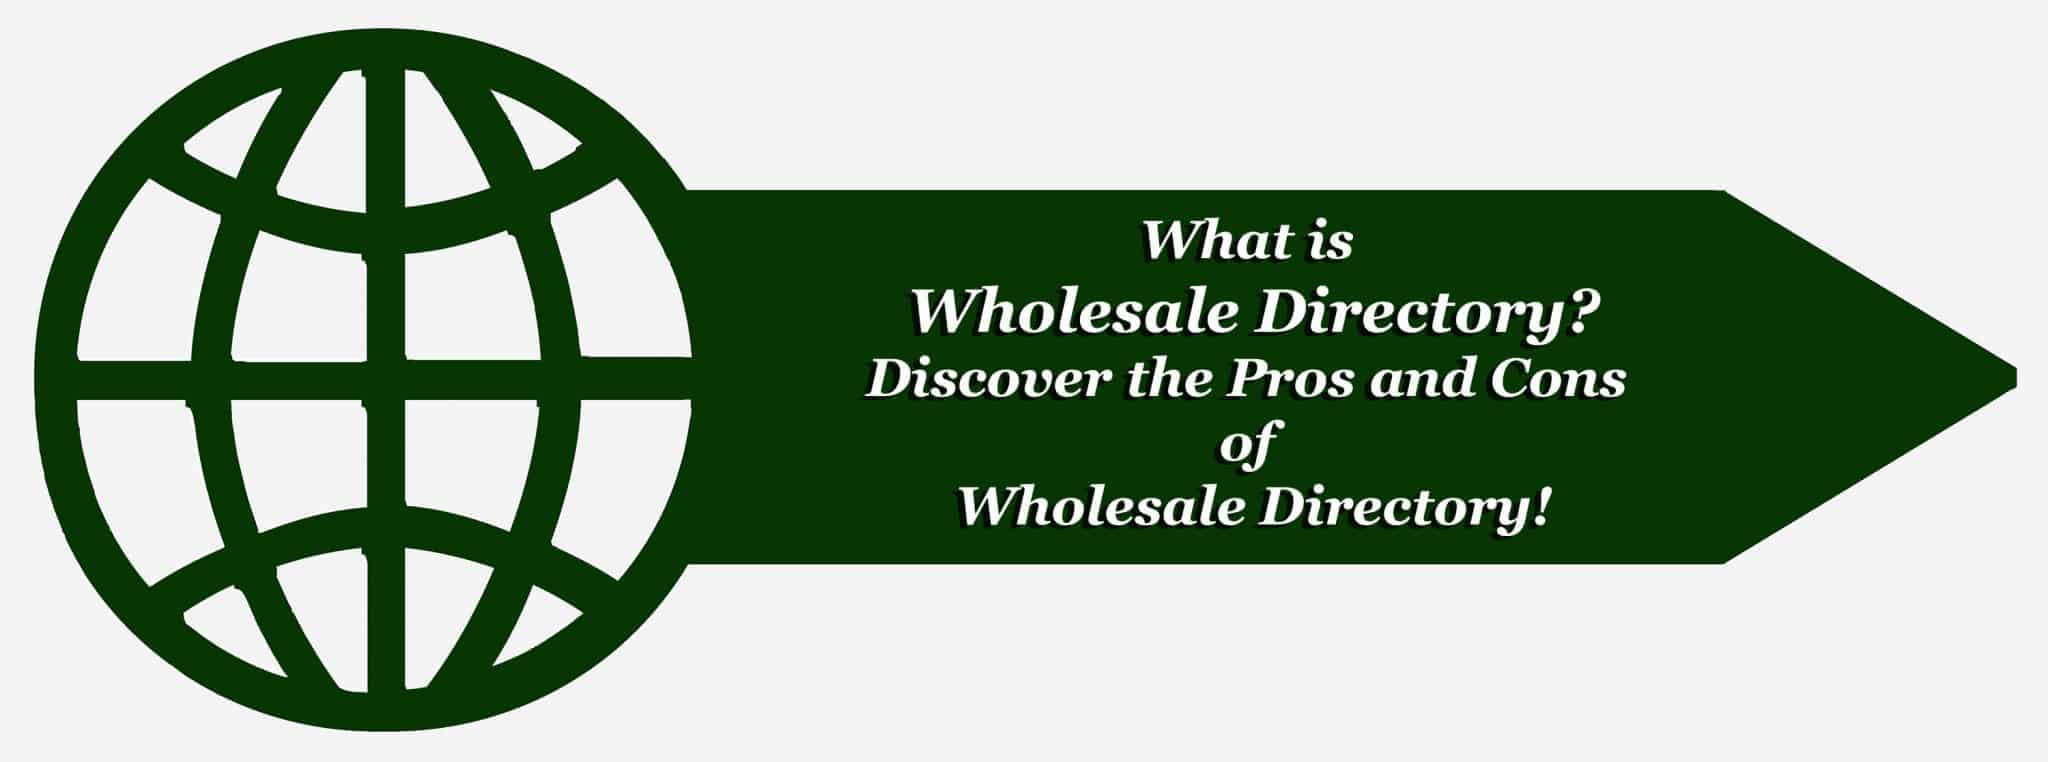 What is Wholesale Directory – Discover the Pros and Cons of Wholesale Directory